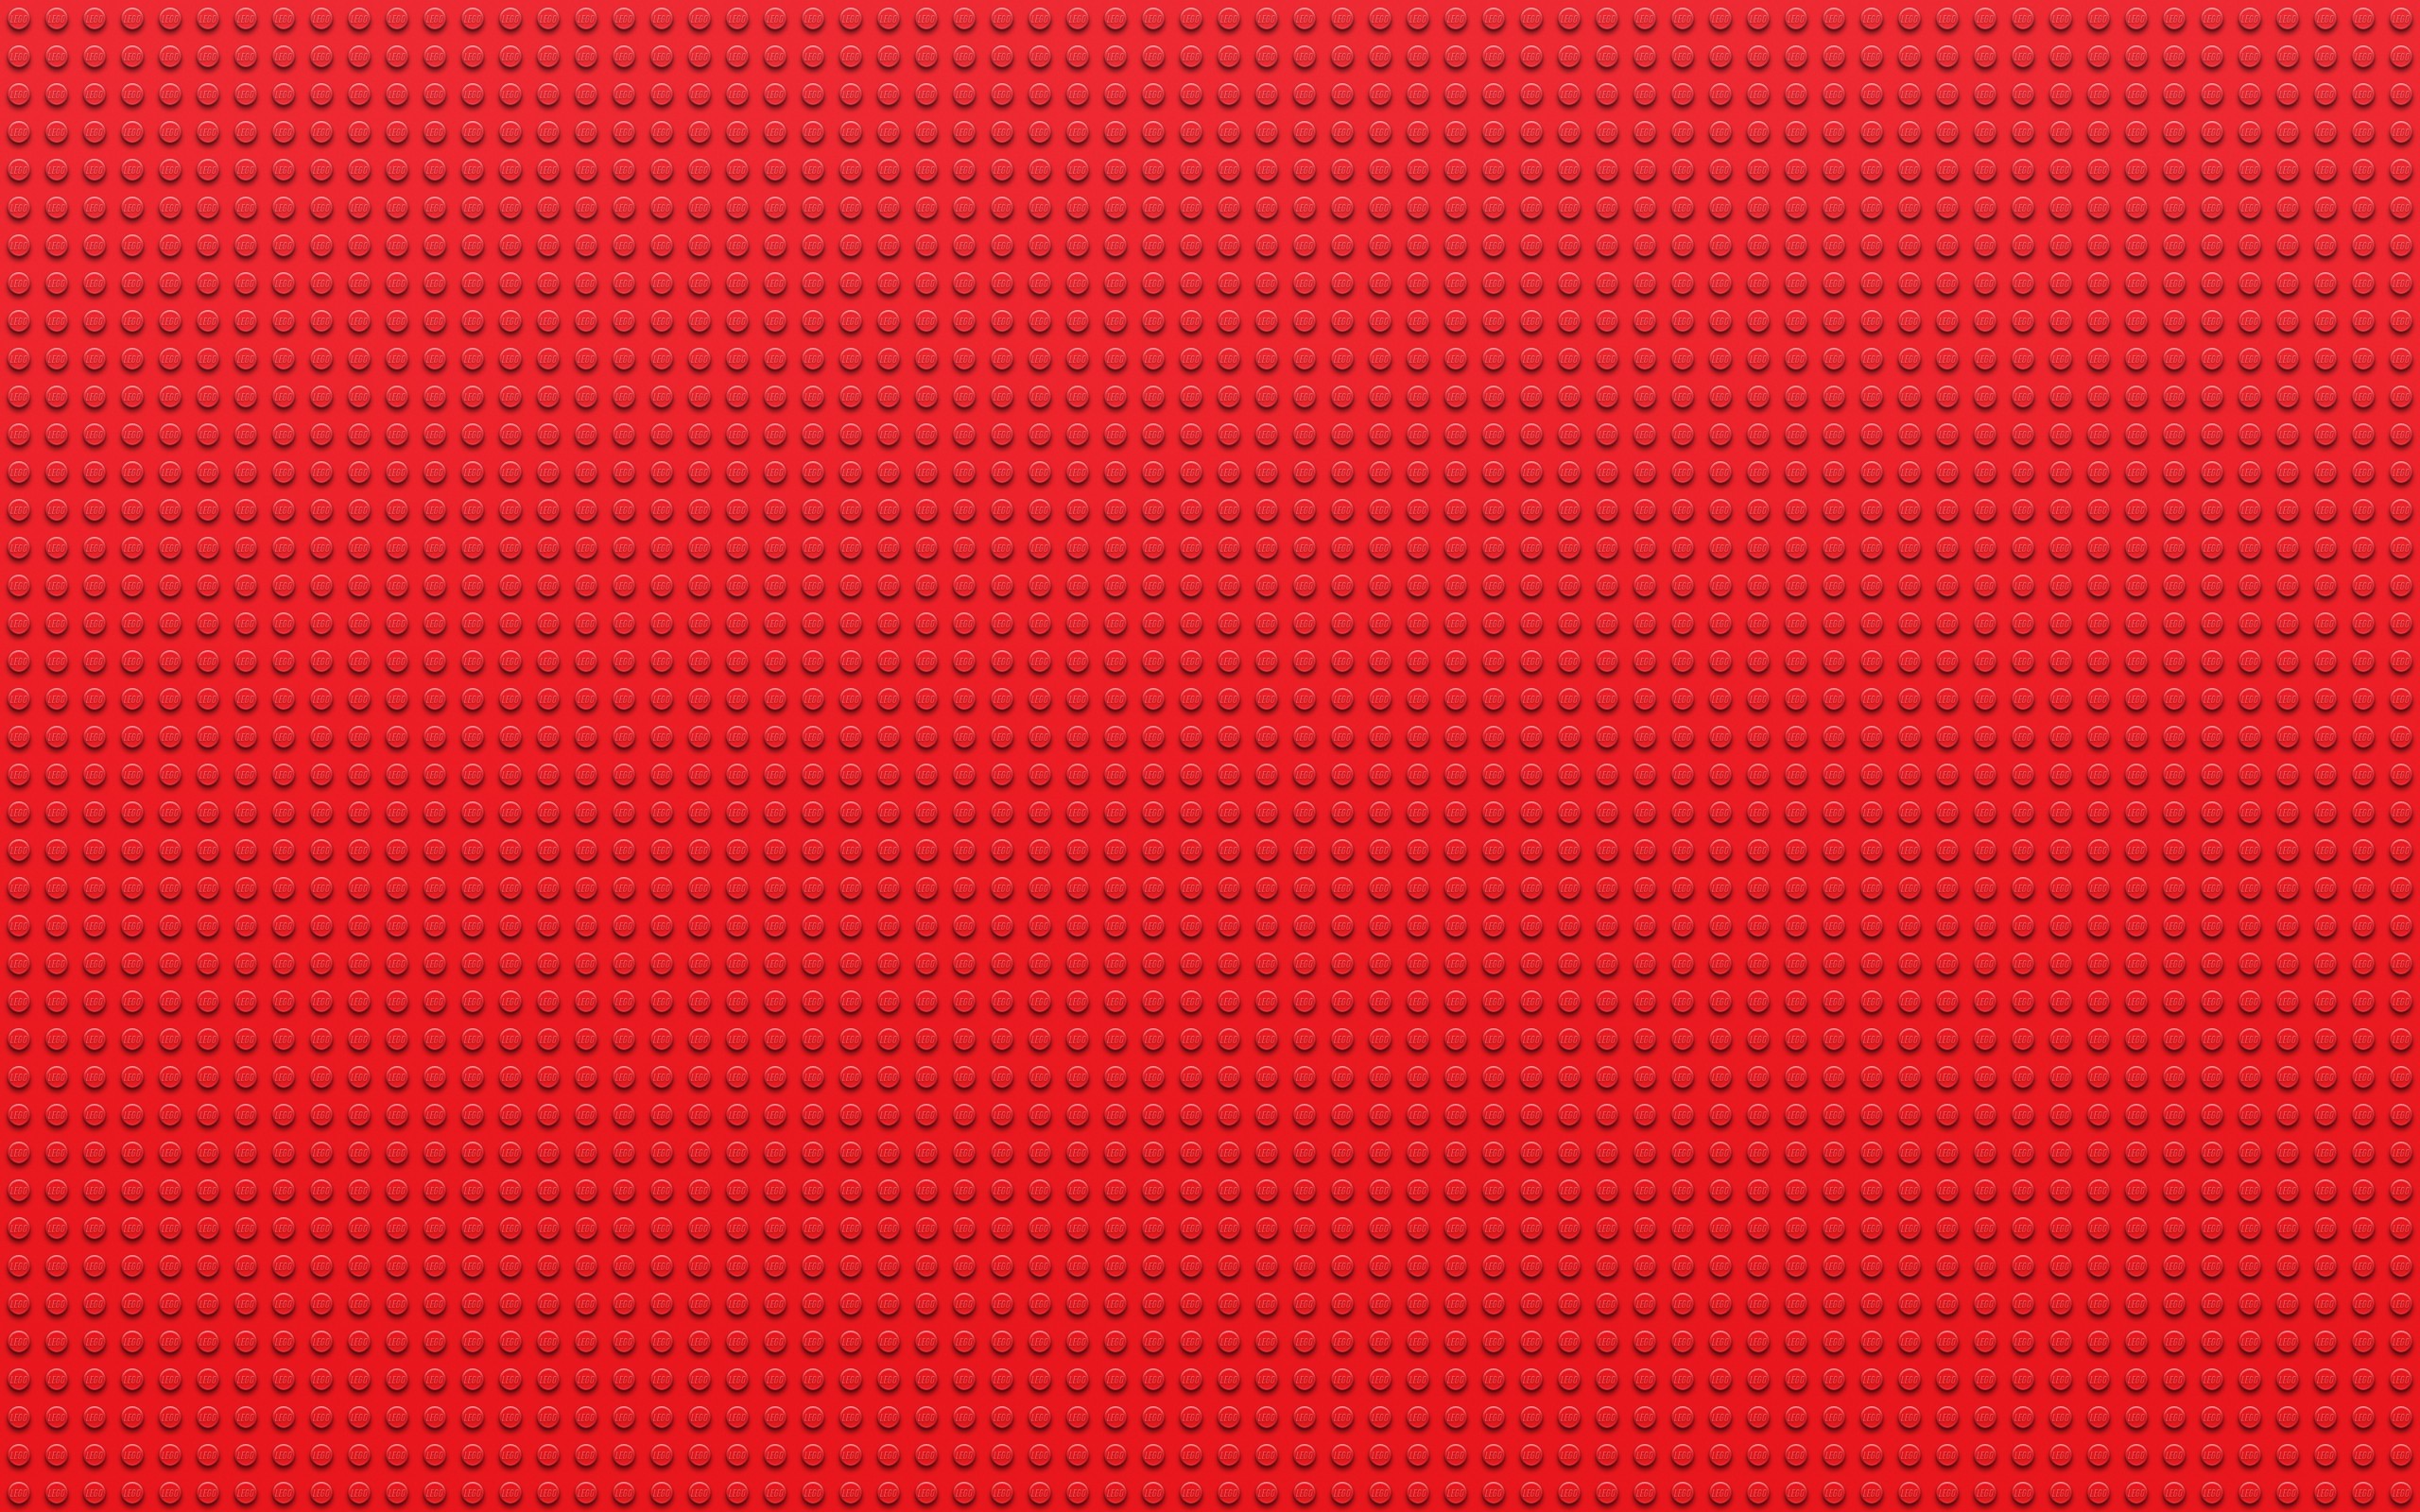 General 2560x1600 texture pattern red background toys LEGO